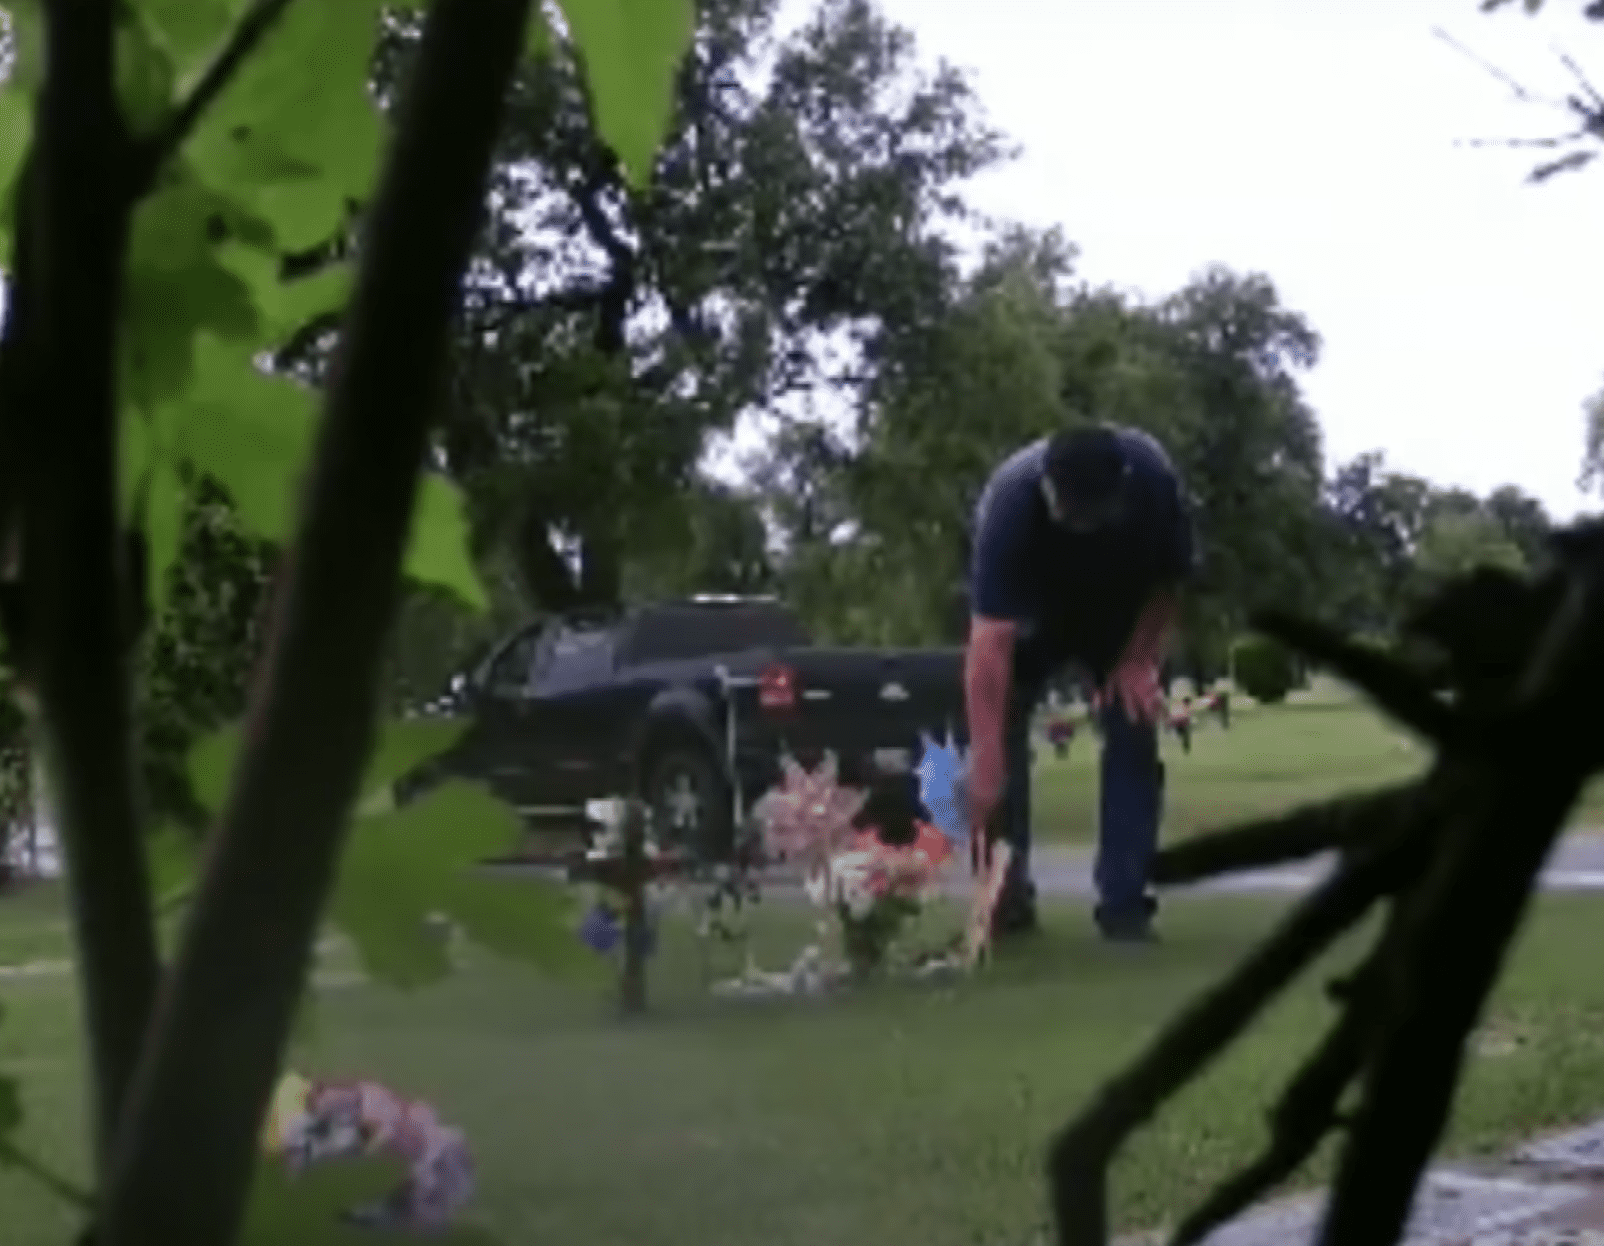 An elderly man caught stealing from a grave. | Source: youtube.com/Inside Edition